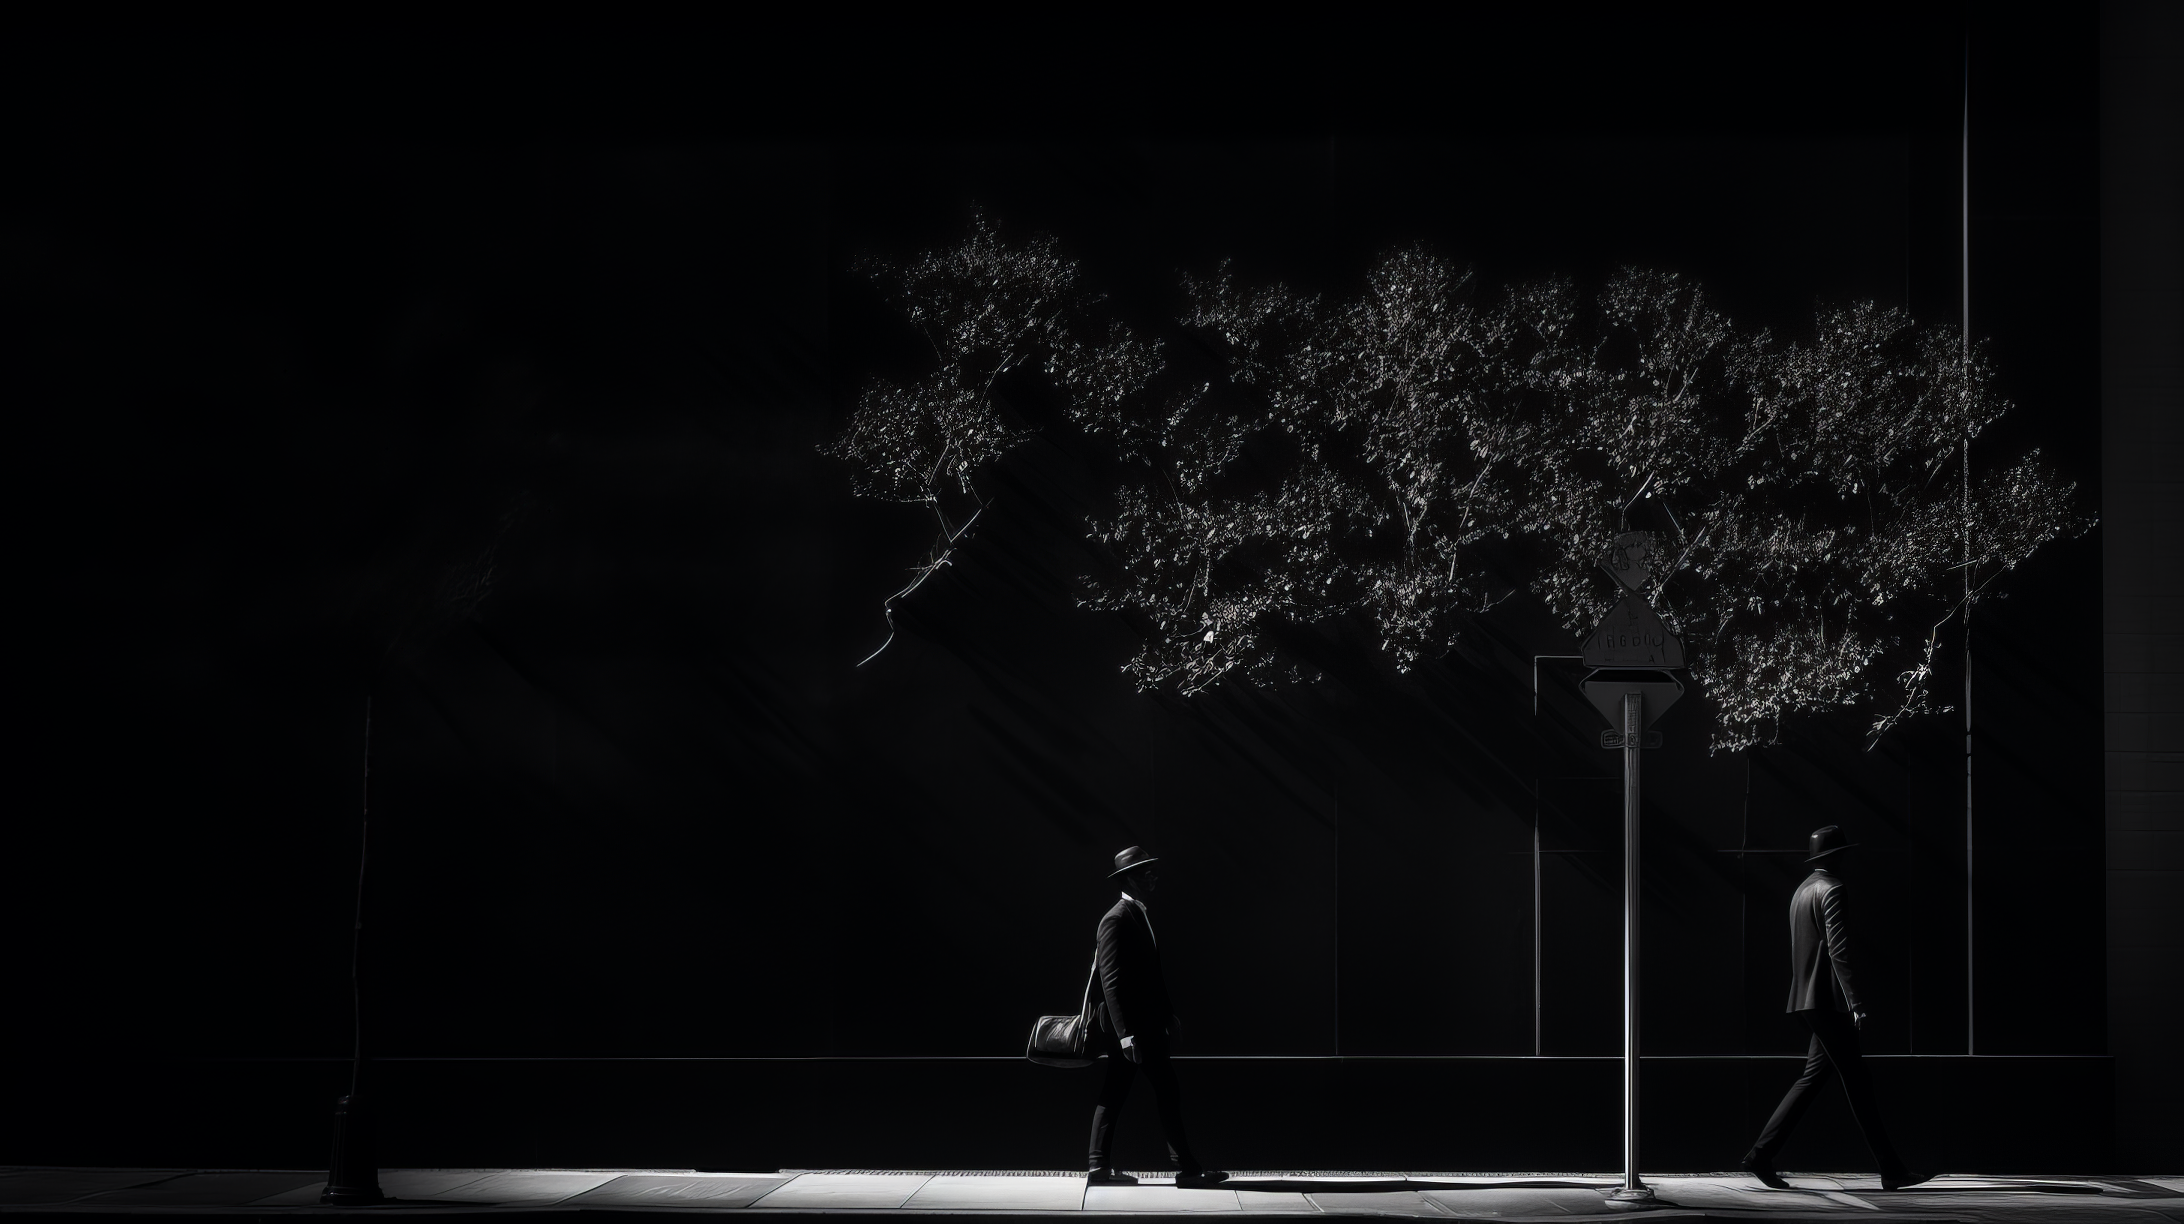 HD wallpaper featuring a monochrome city scene with silhouettes of two people walking and a tree, creating a black aesthetic.